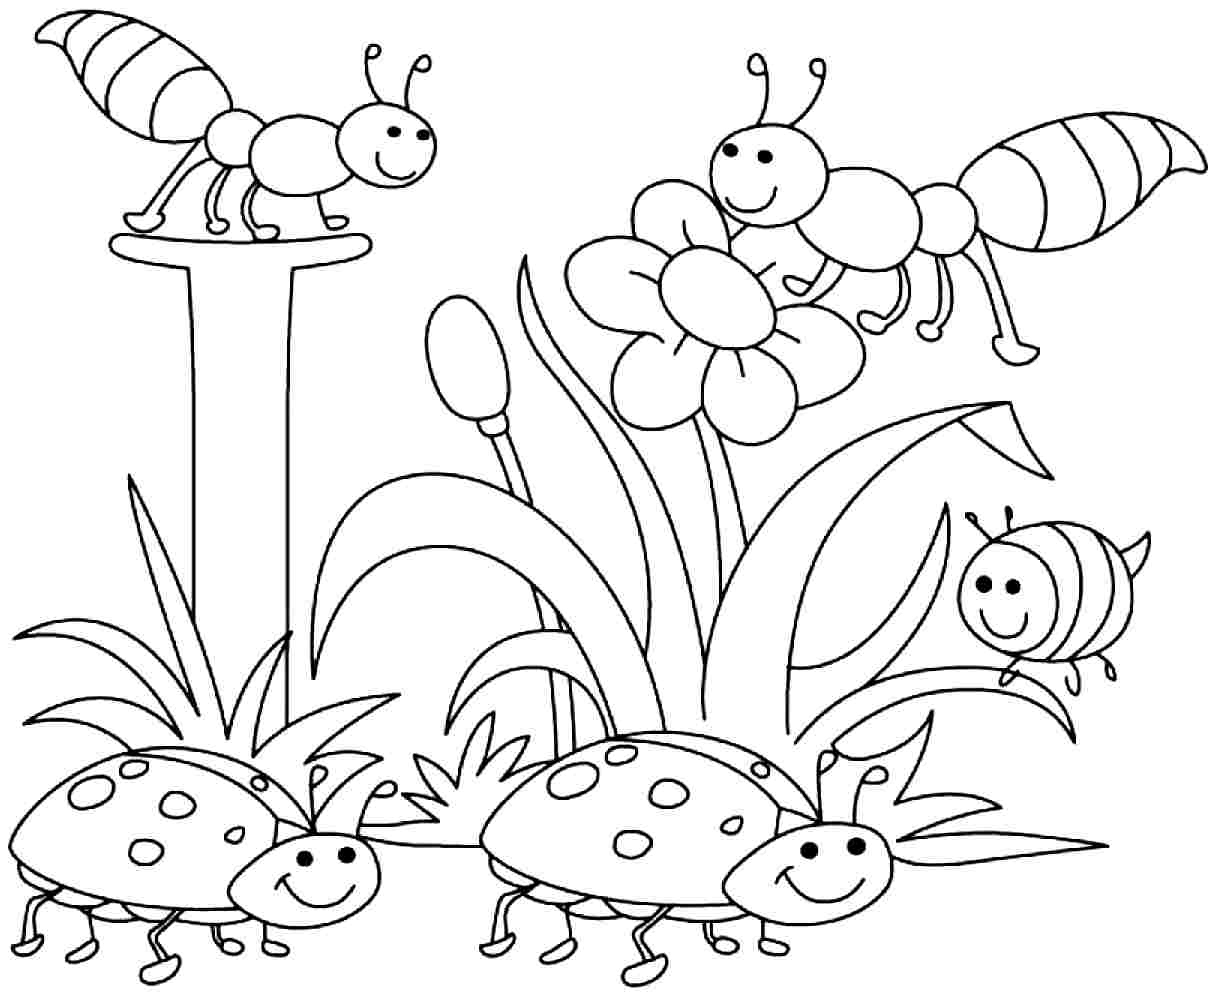 Be Kind Coloring Page at GetDrawings | Free download